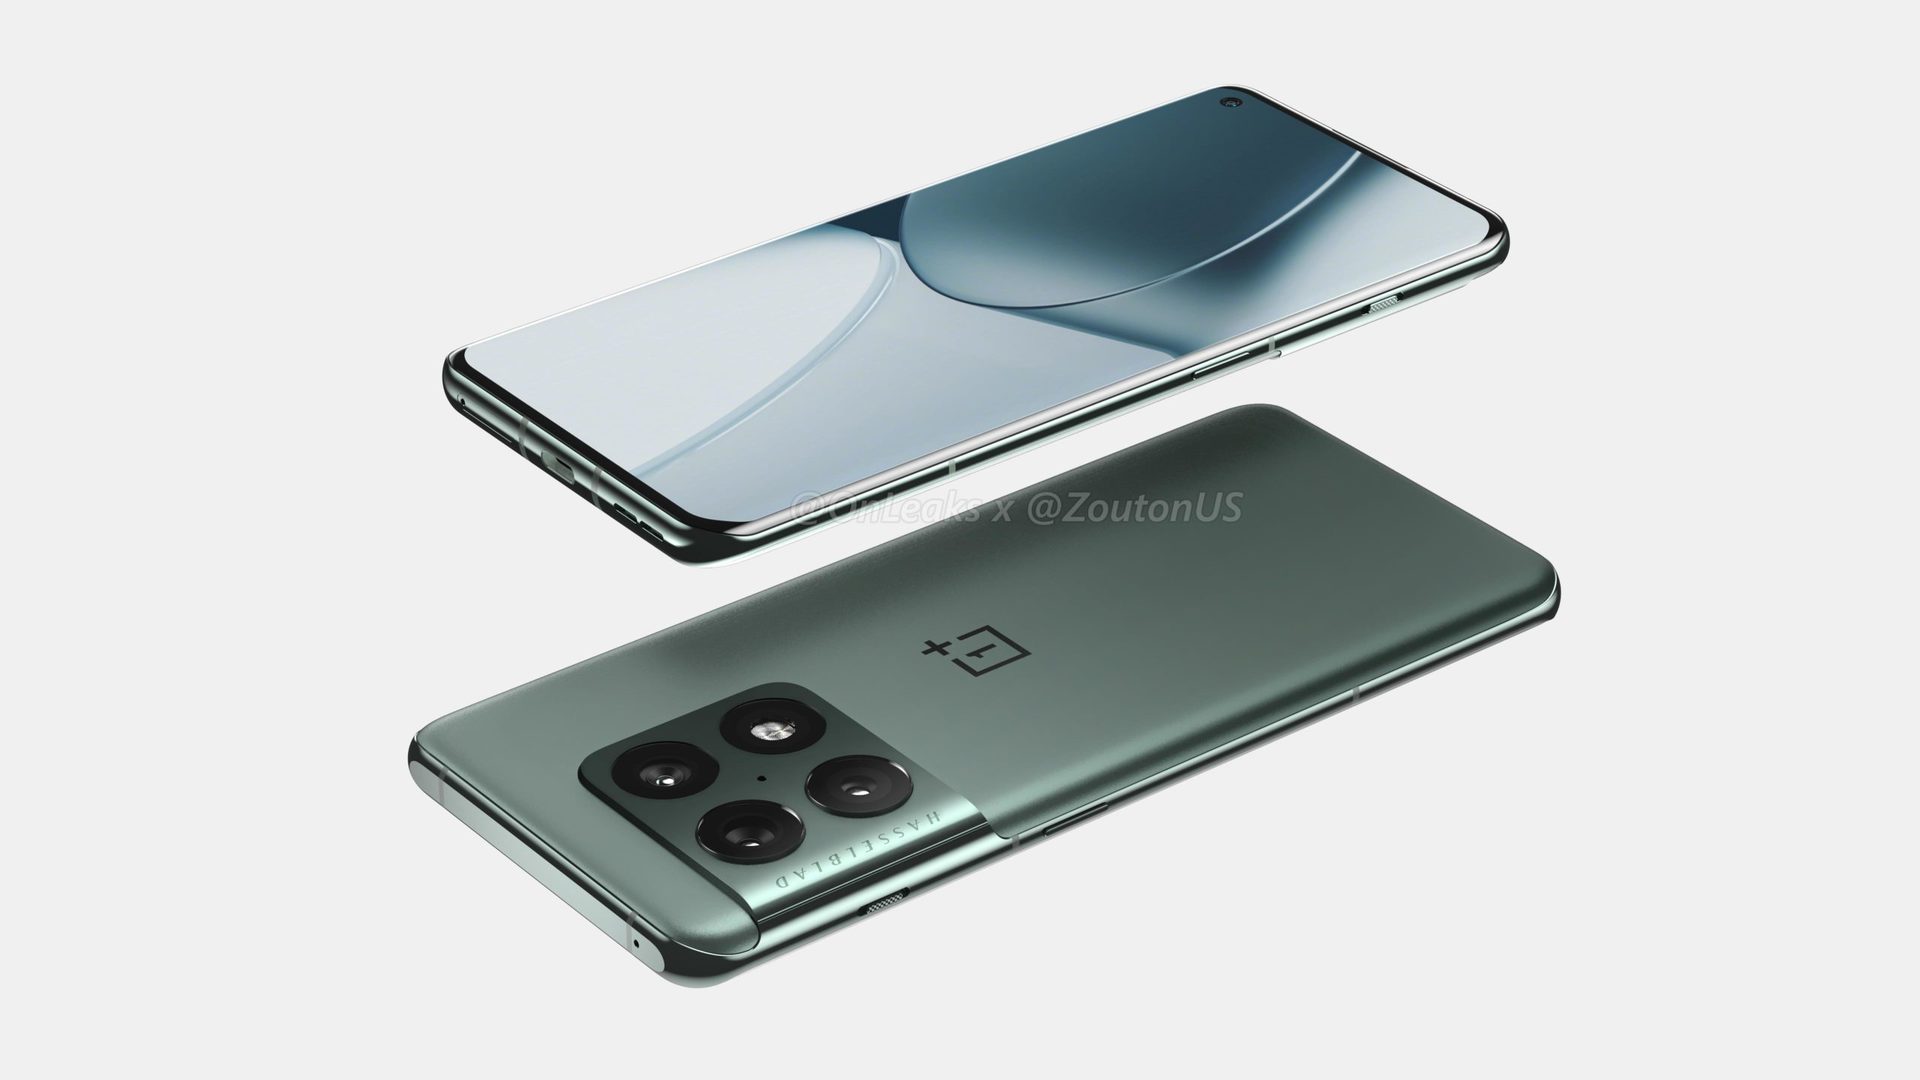 Earlier than expected: OnePlus says OnePlus 10 Pro is coming in